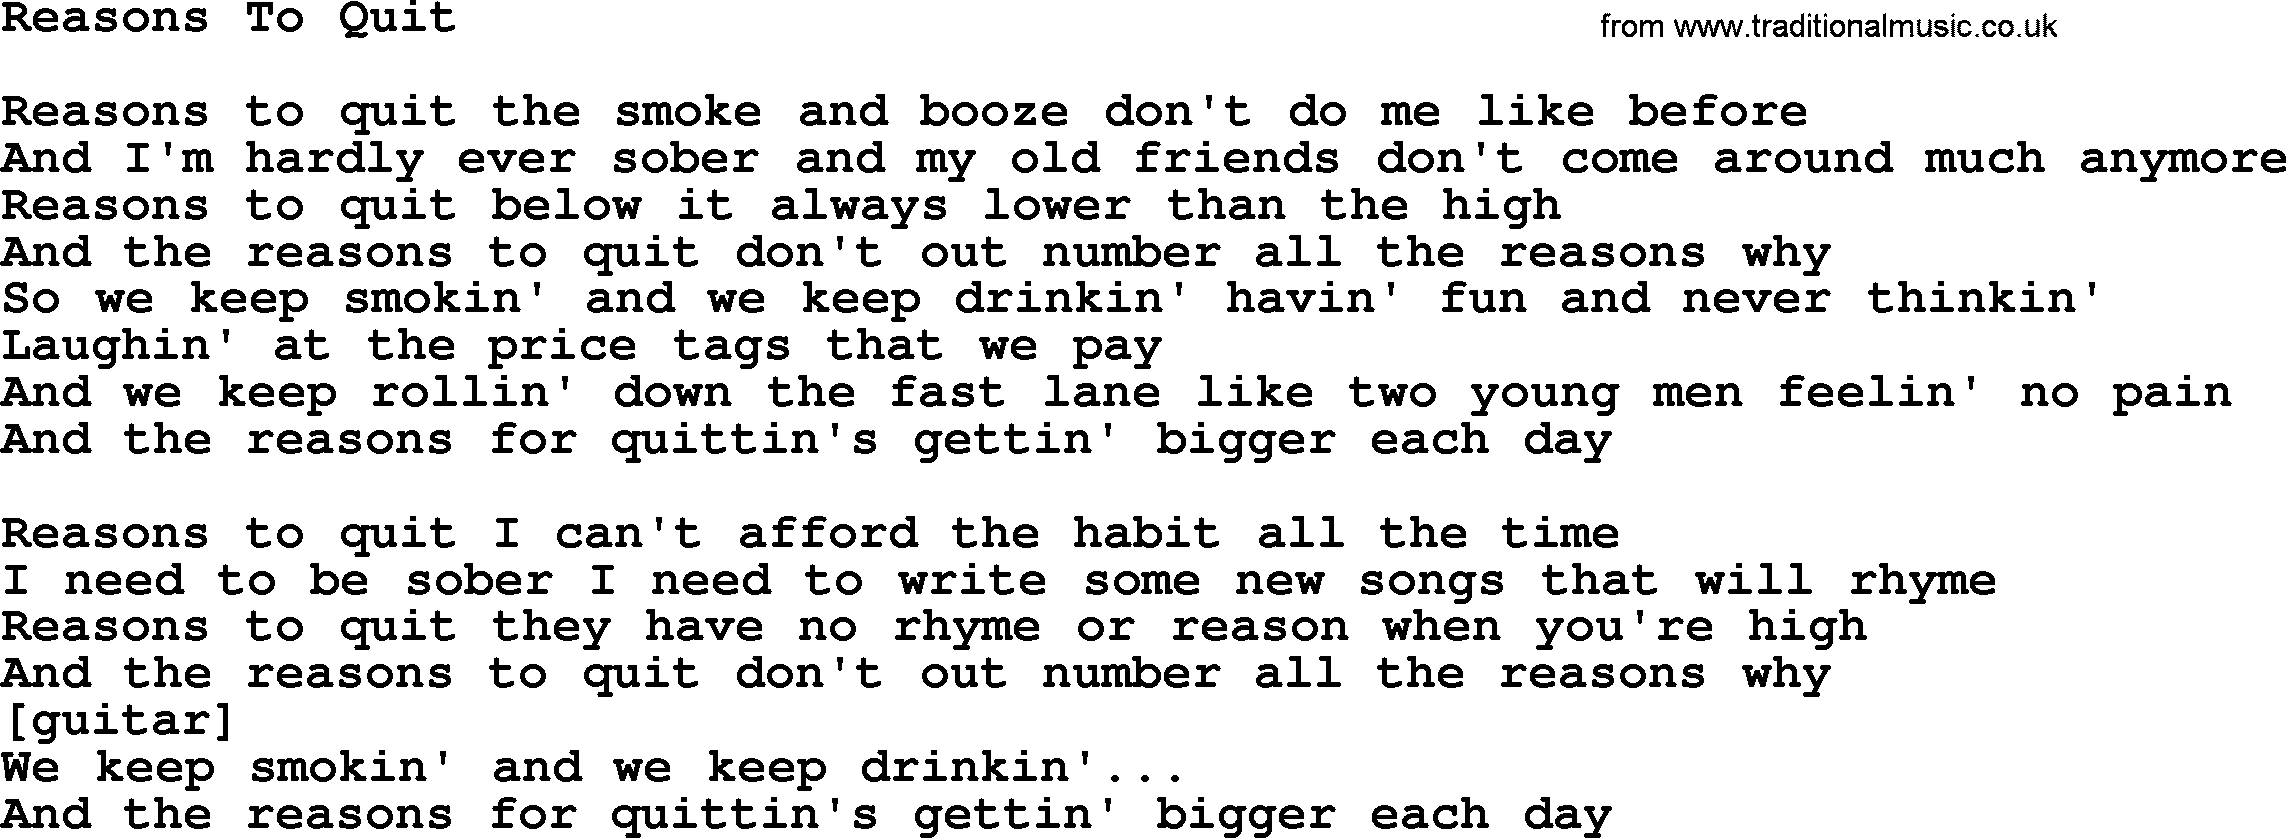 Willie Nelson song: Reasons To Quit lyrics